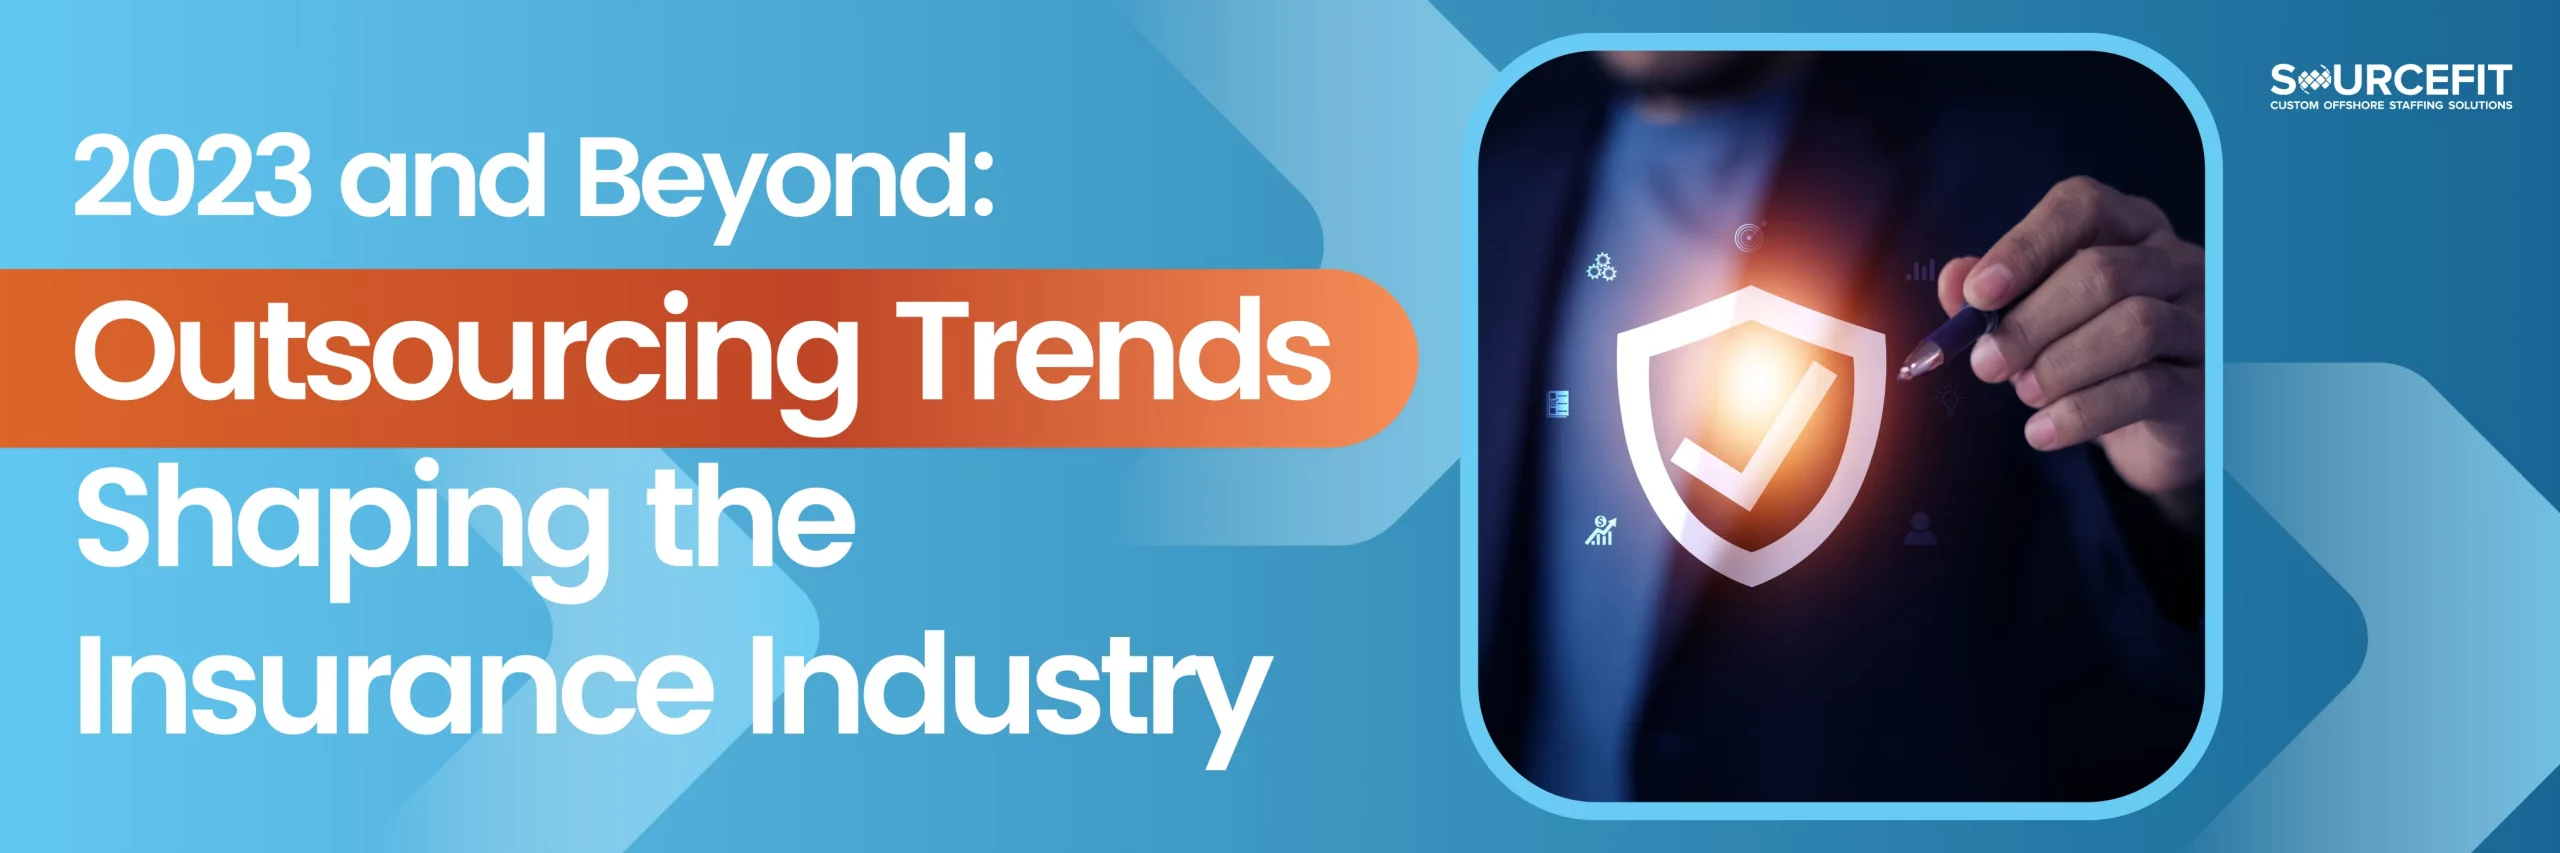 2023-and-beyond_-Outsourcing-Trends-Shaping-the-Insurance-Industry._1200x6281